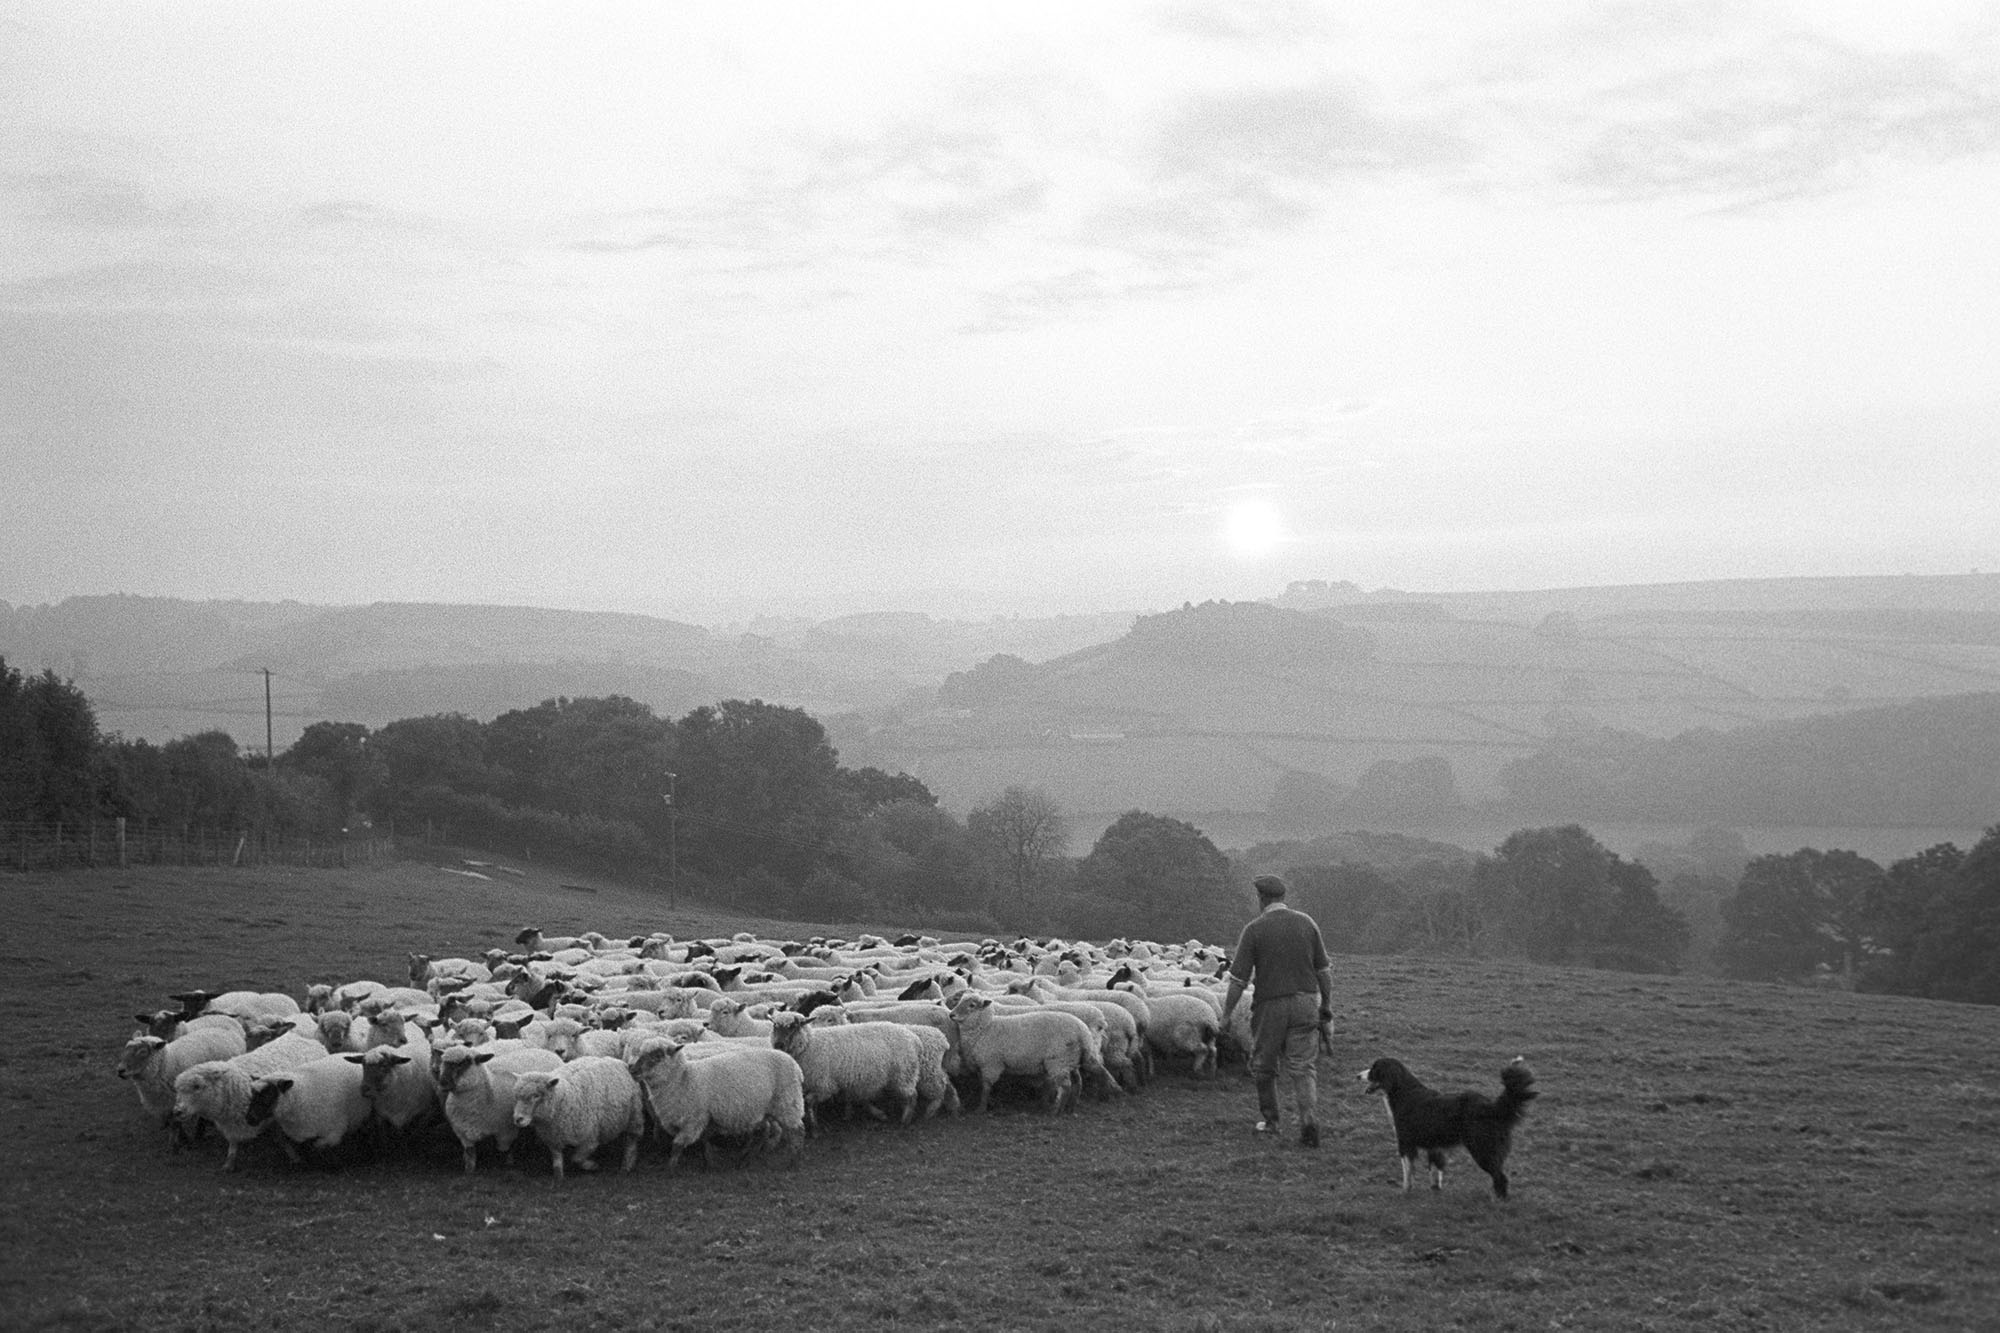 Farmer, shepherd rounding up flock of sheep with dog, evening landscape. <br />
[George Ayre rounding up sheep with a dog, in the evening sunset at Ashwell, Dolton. A hilly landscape is visible in the background, with trees and fields below the setting sun.]